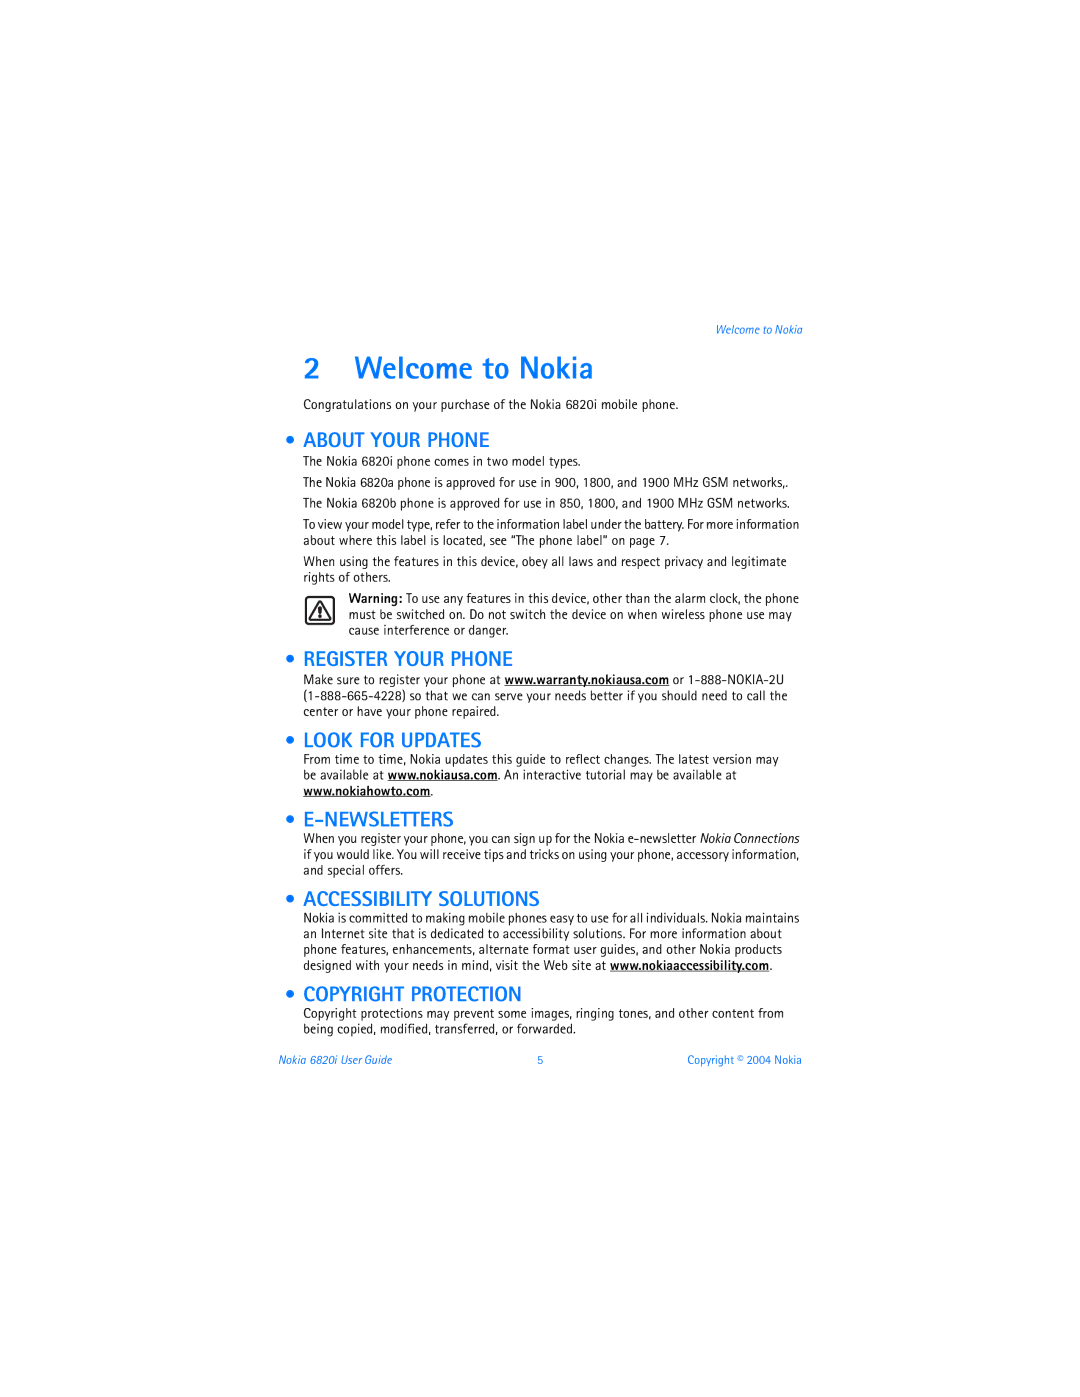 Nokia 6820i warranty Welcome to Nokia, About Your Phone, Register Your Phone Look for Updates Newsletters 